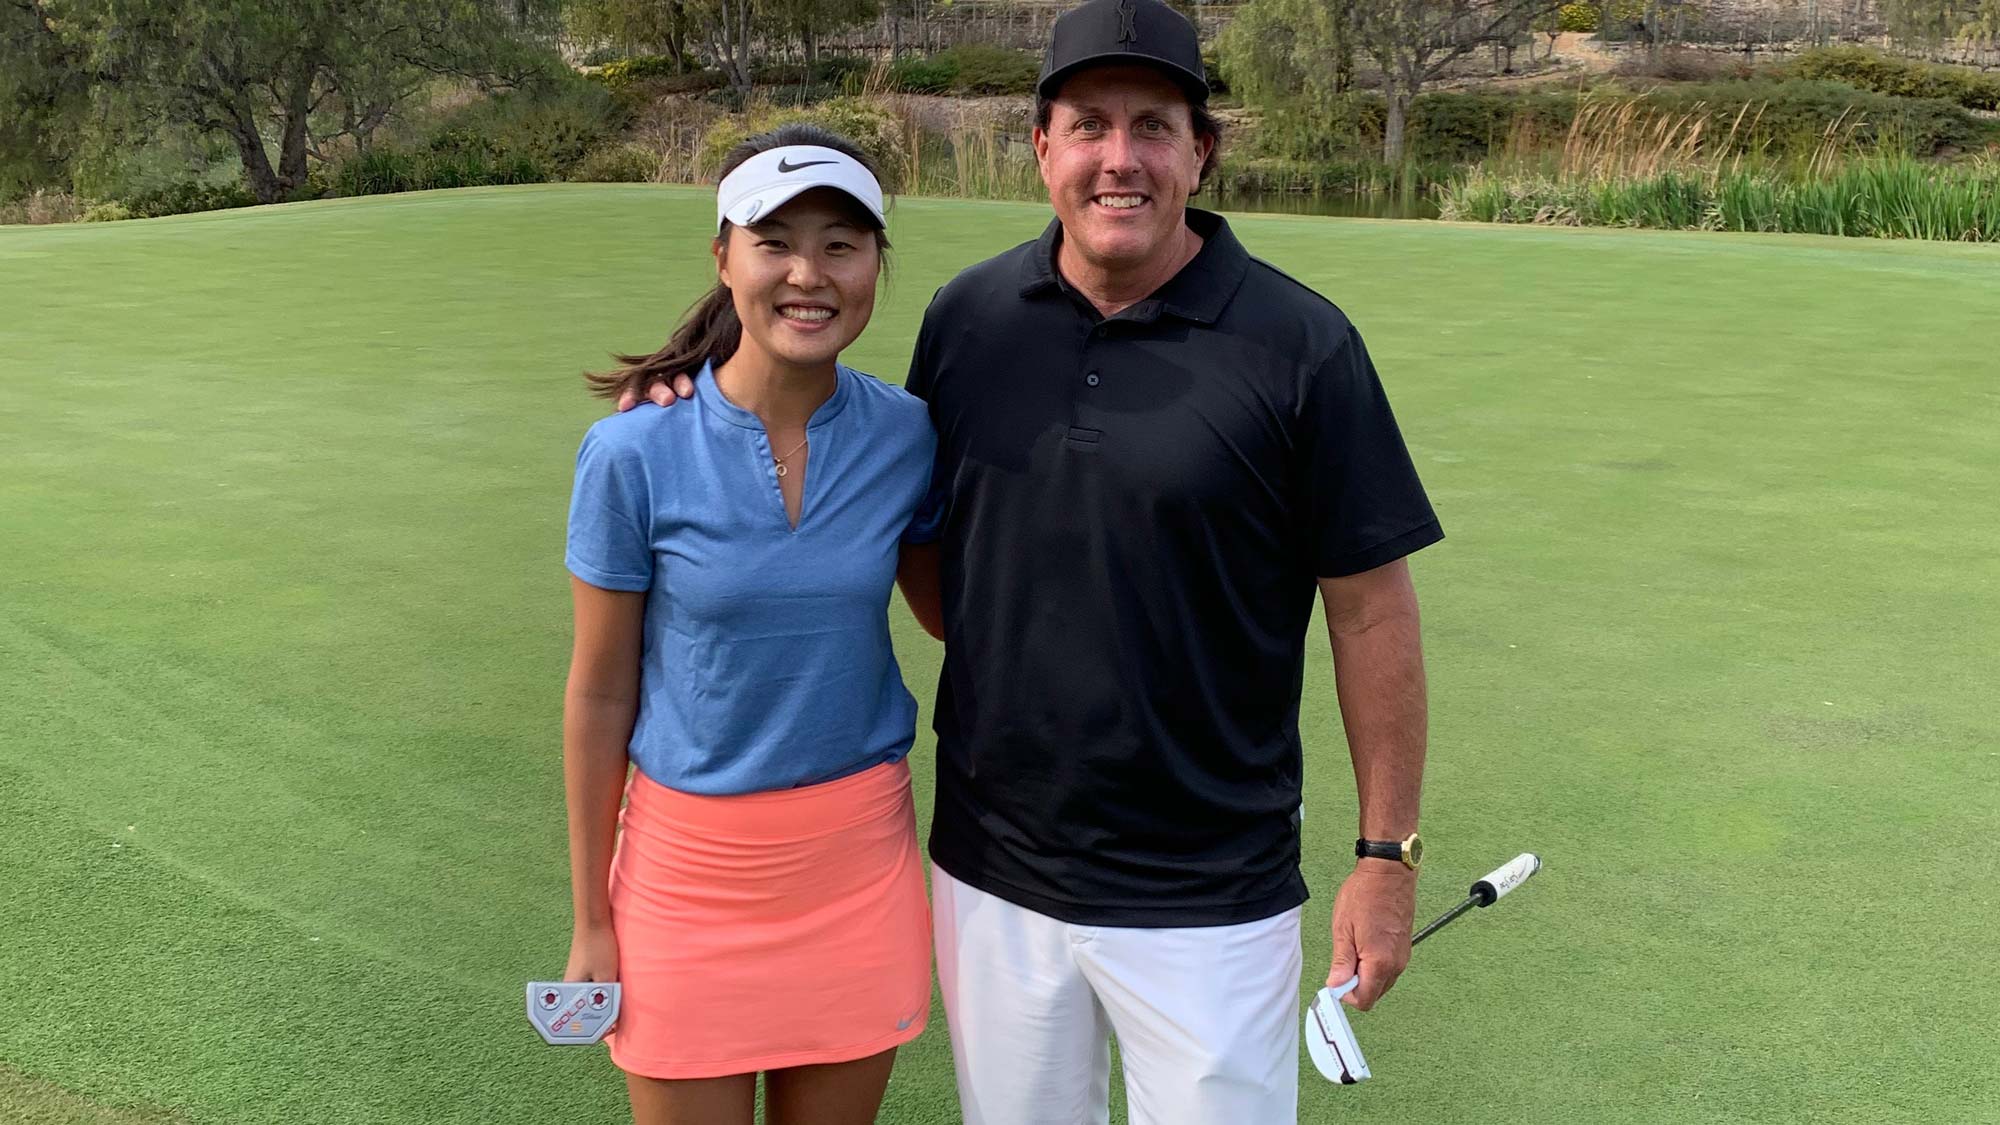 Sandy Choi and Phil Mickelson